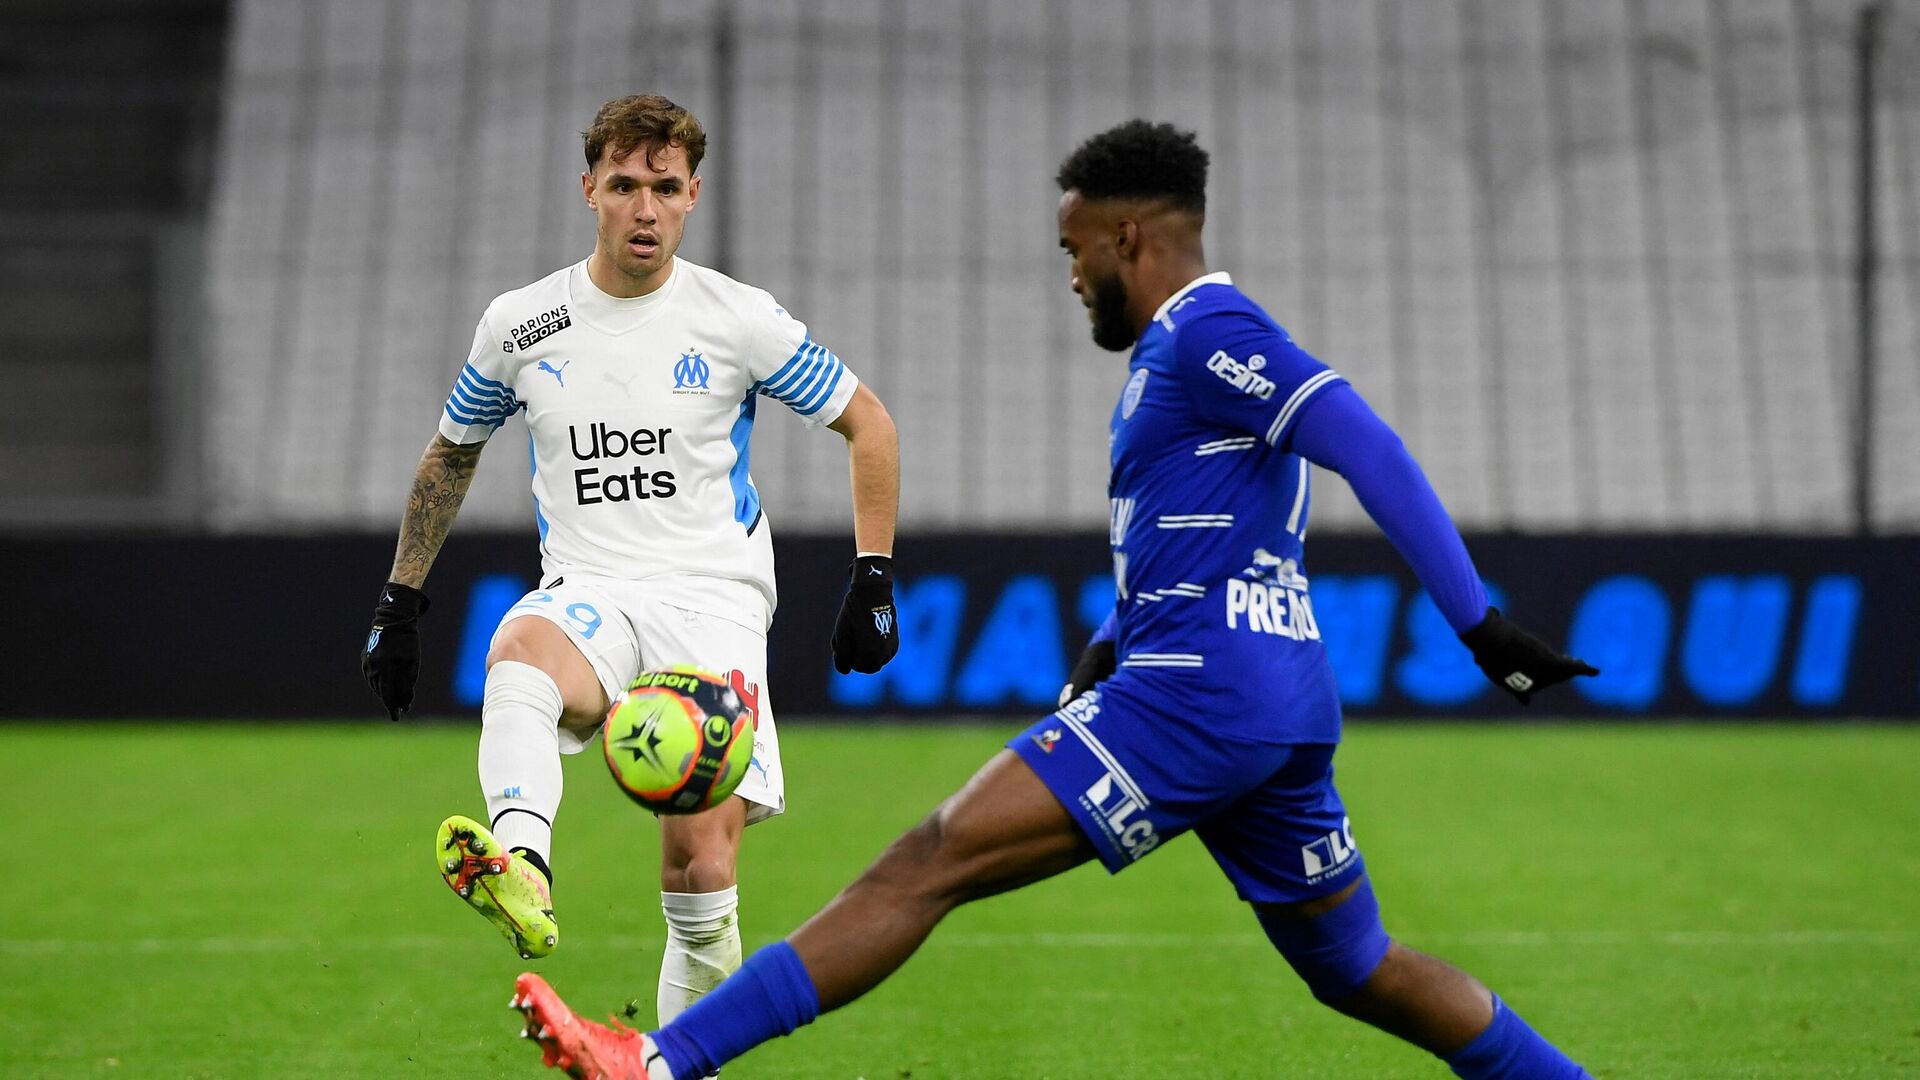 Marseille's Spanish defender Pol Lirola passes the ball during the French L1 football match between Olympique de Marseille and Troyes at the Velodrome Stadium in Marseille, southern France, on November 28, 2021. (Photo by Nicolas TUCAT / AFP) - РИА Новости, 1920, 29.11.2021